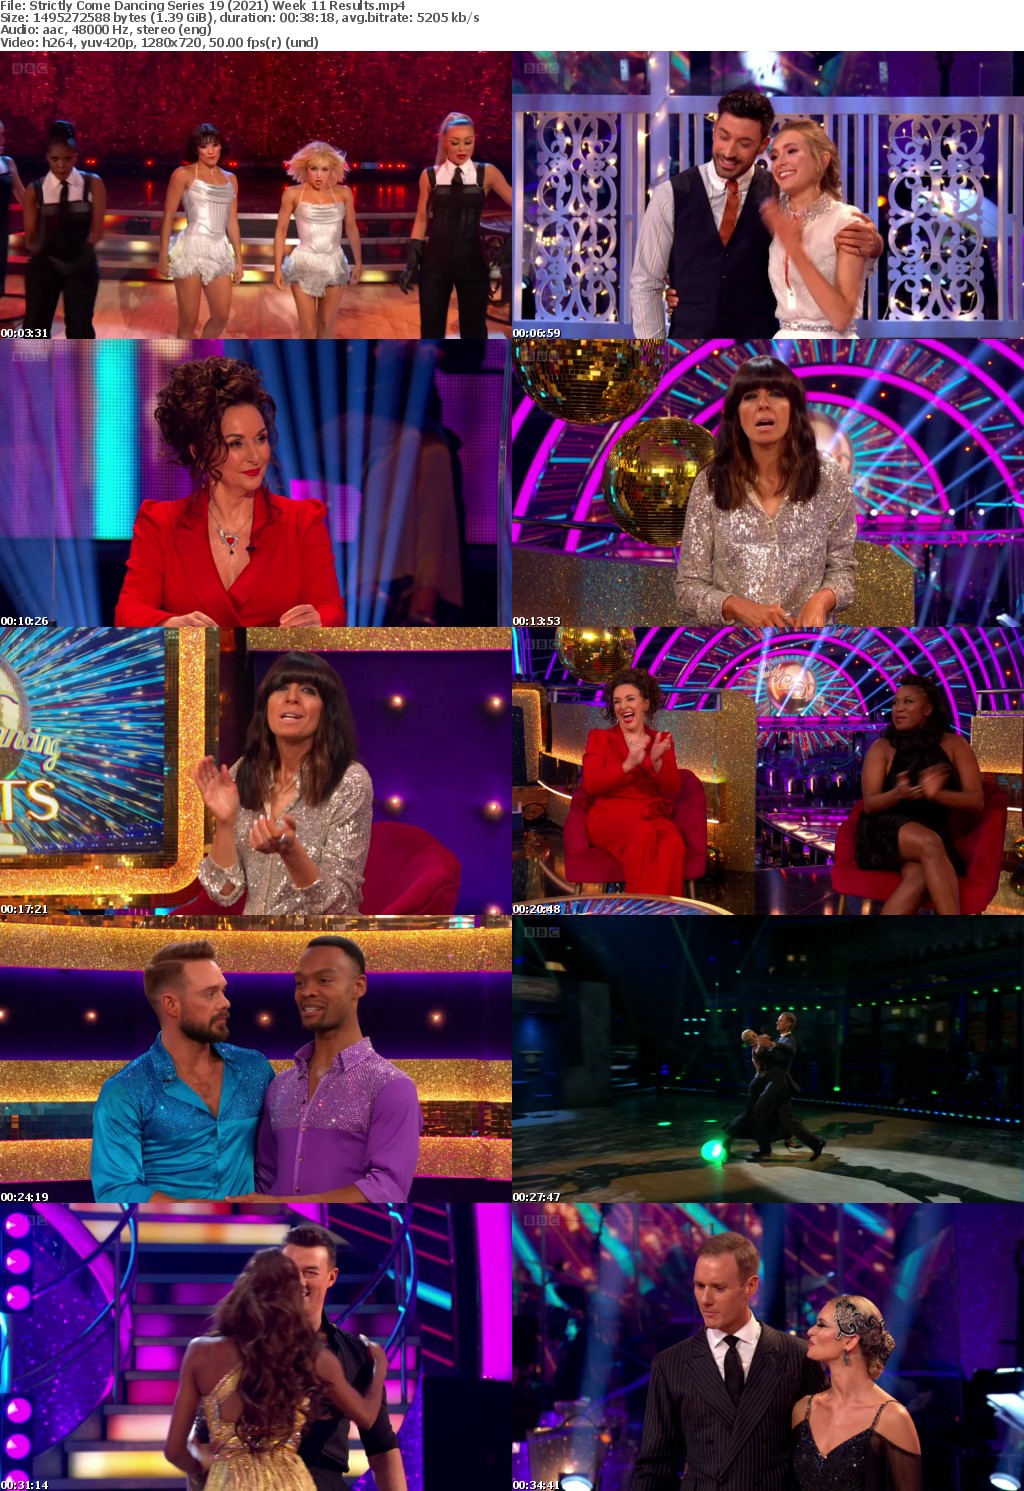 Strictly Come Dancing Series 19 (2021) Week 11 Results (1280x720p HD, 50fps, soft Eng subs)